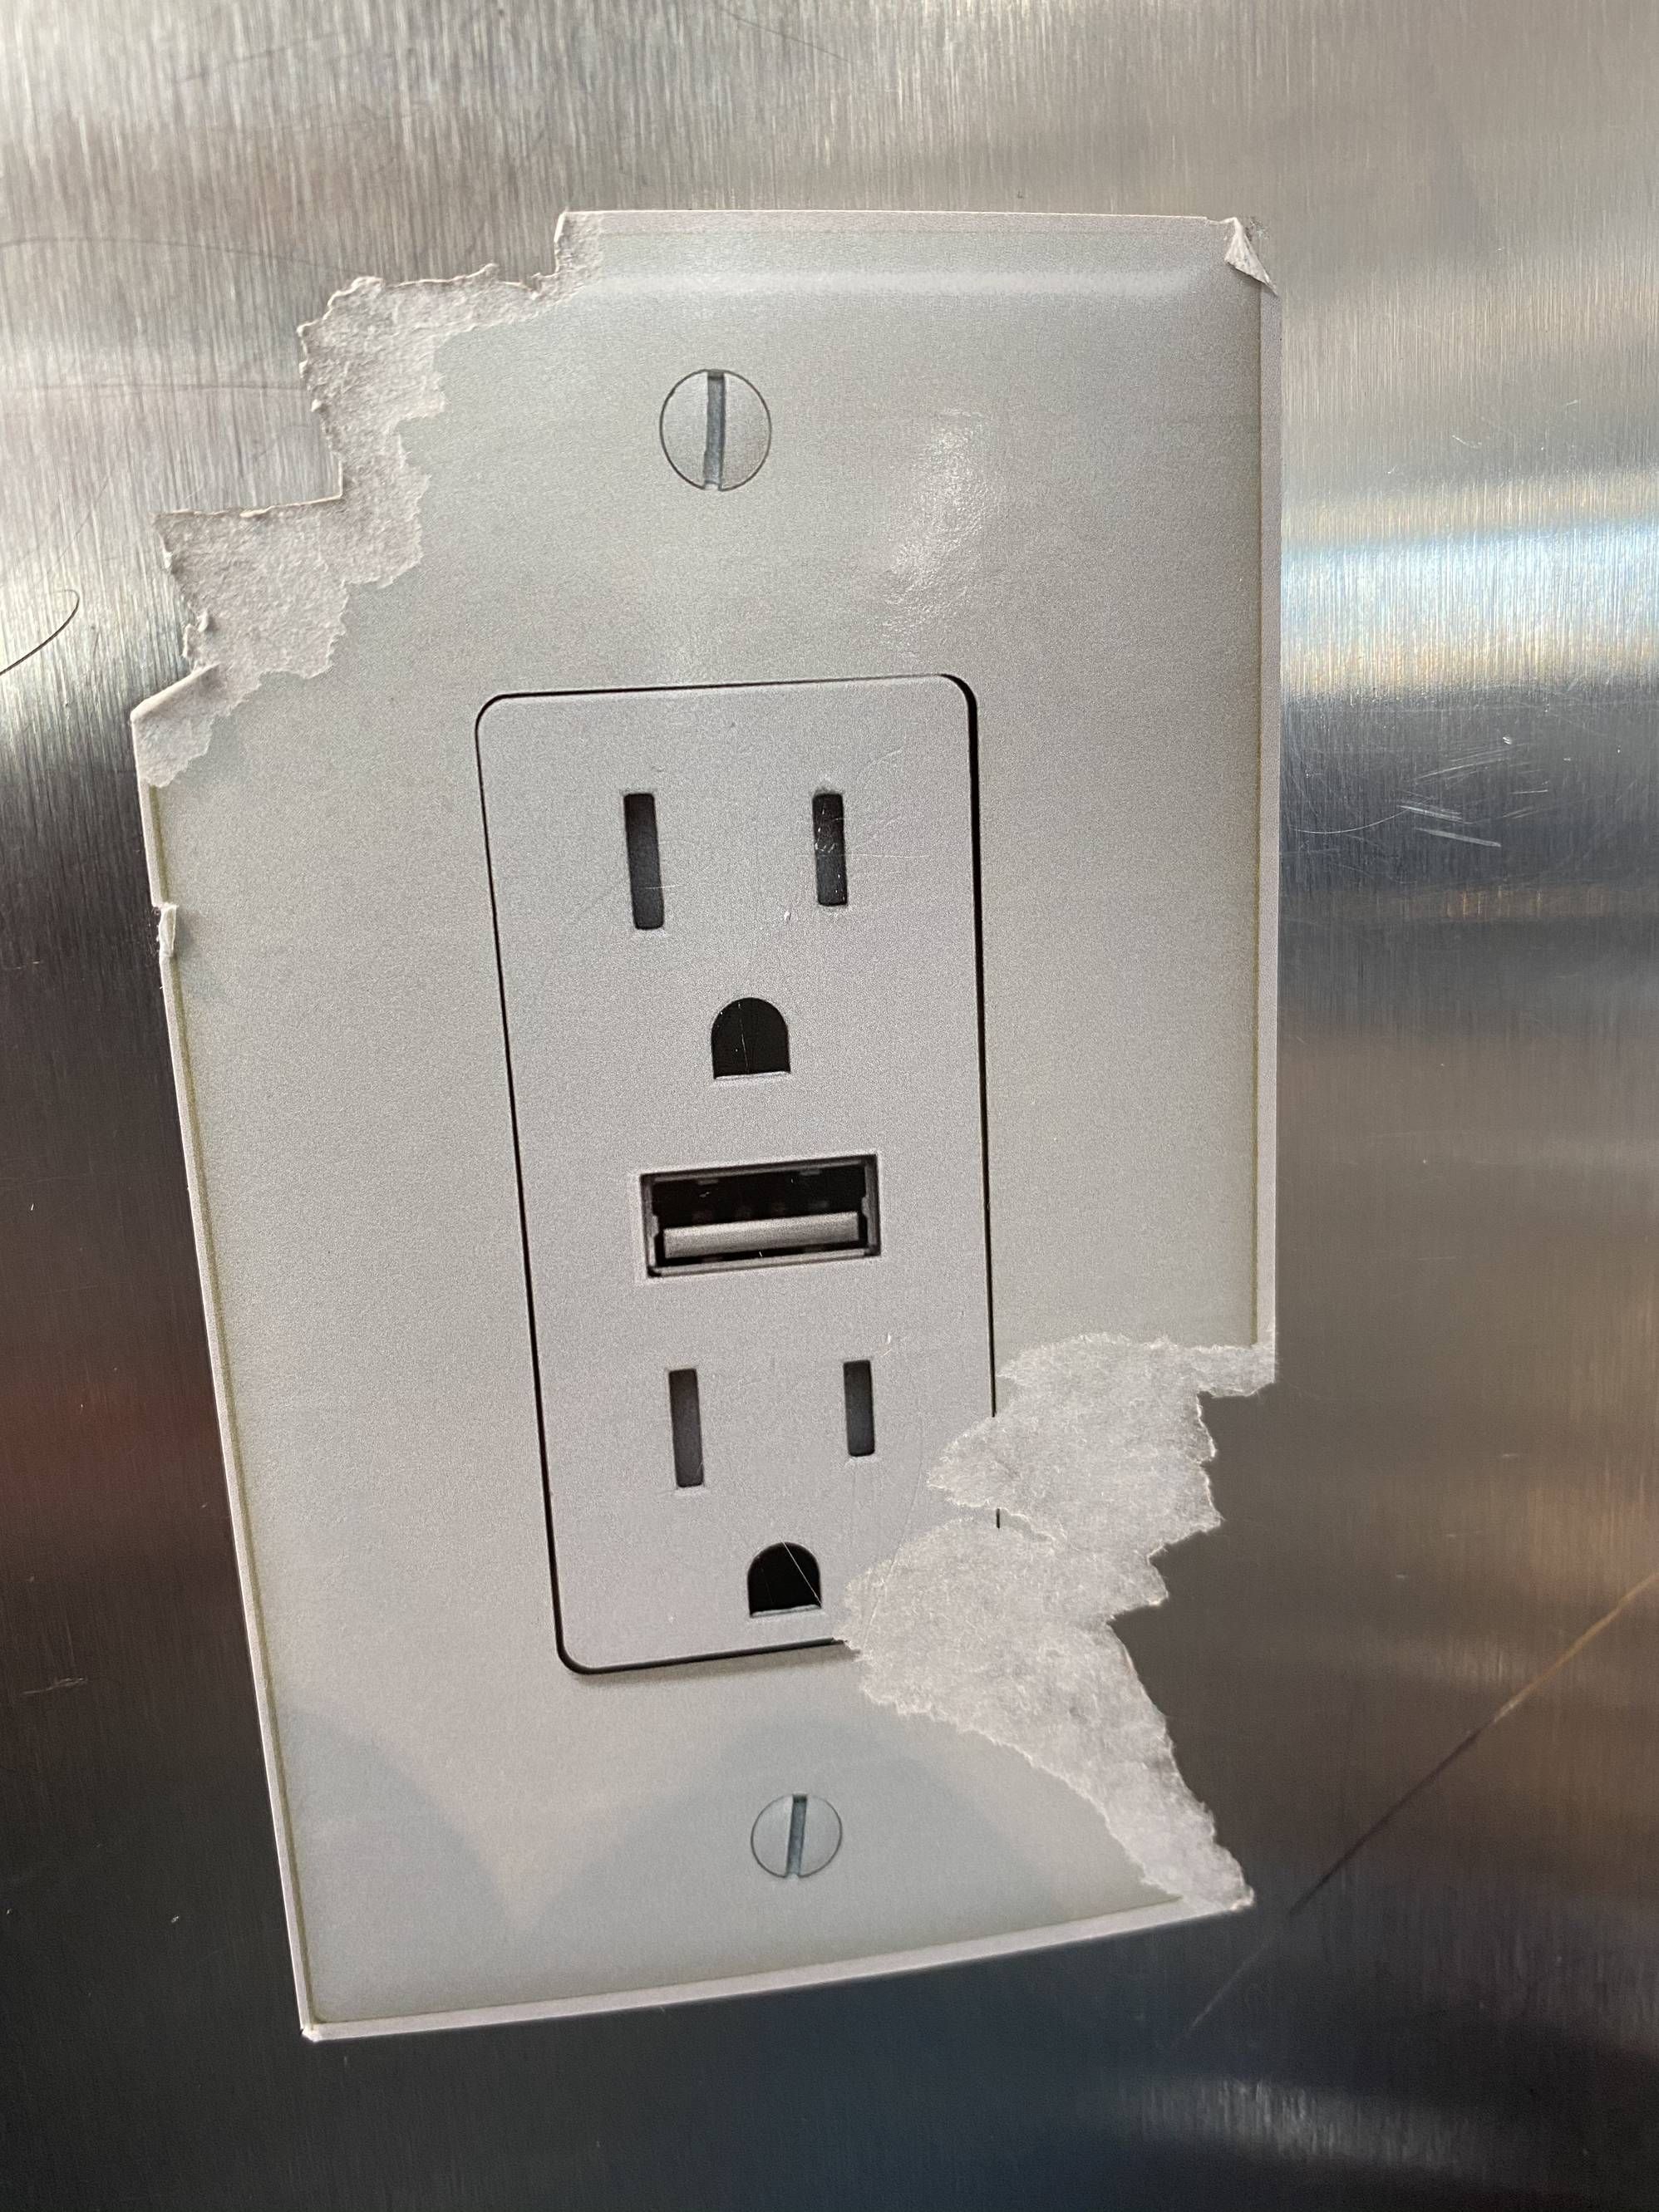 Someone put a sticker of a outlet/USB charger on one of the posts at the Denver International Airport. Someone didn’t find it funny.